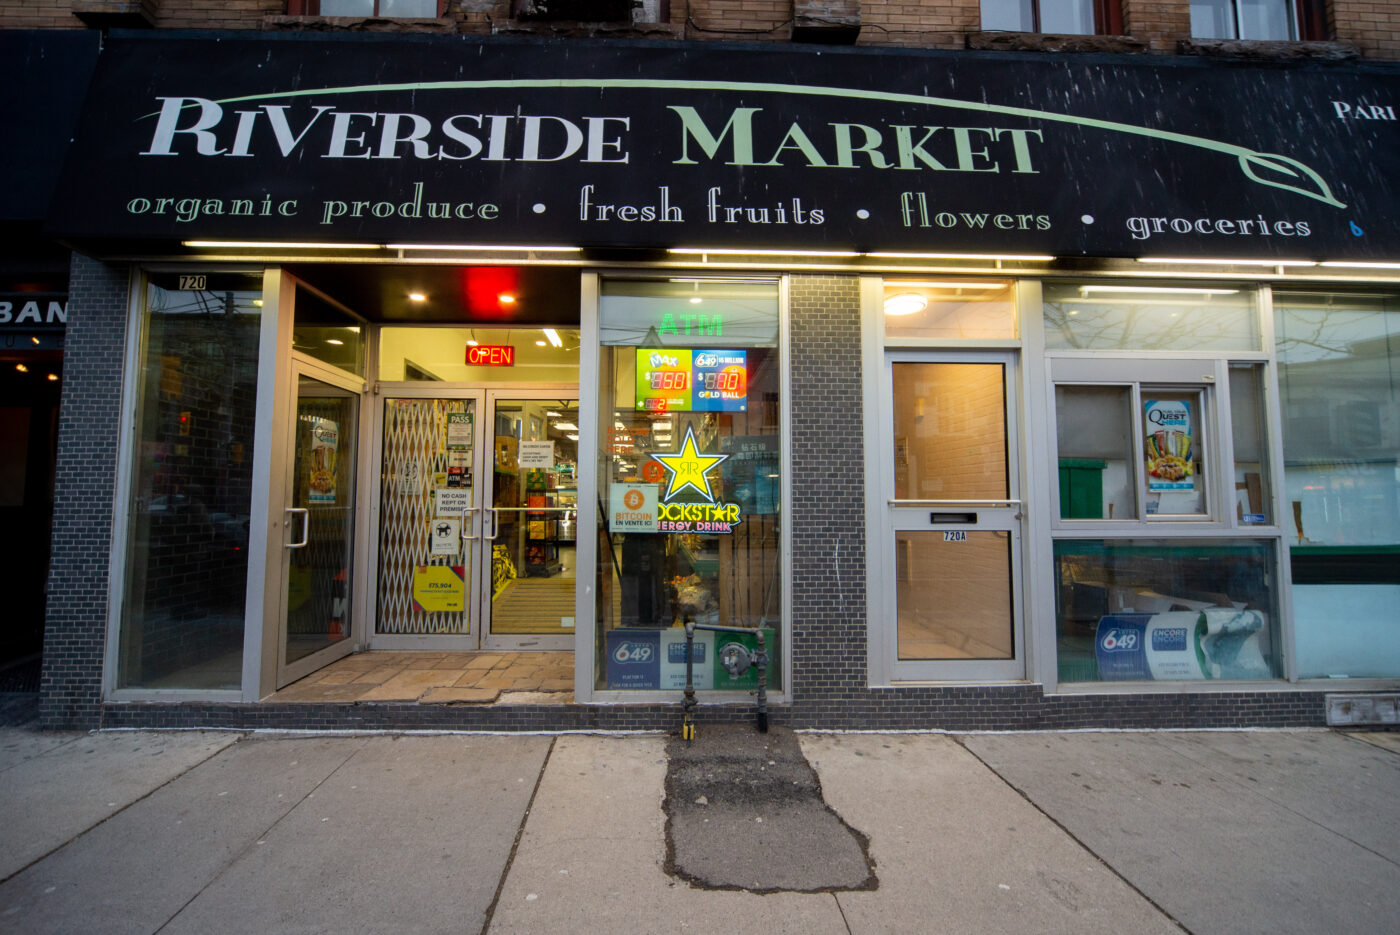 Riverside Market is one of six "Grocery and Variety" stores in Riverside listed by the Business Improvement Area.